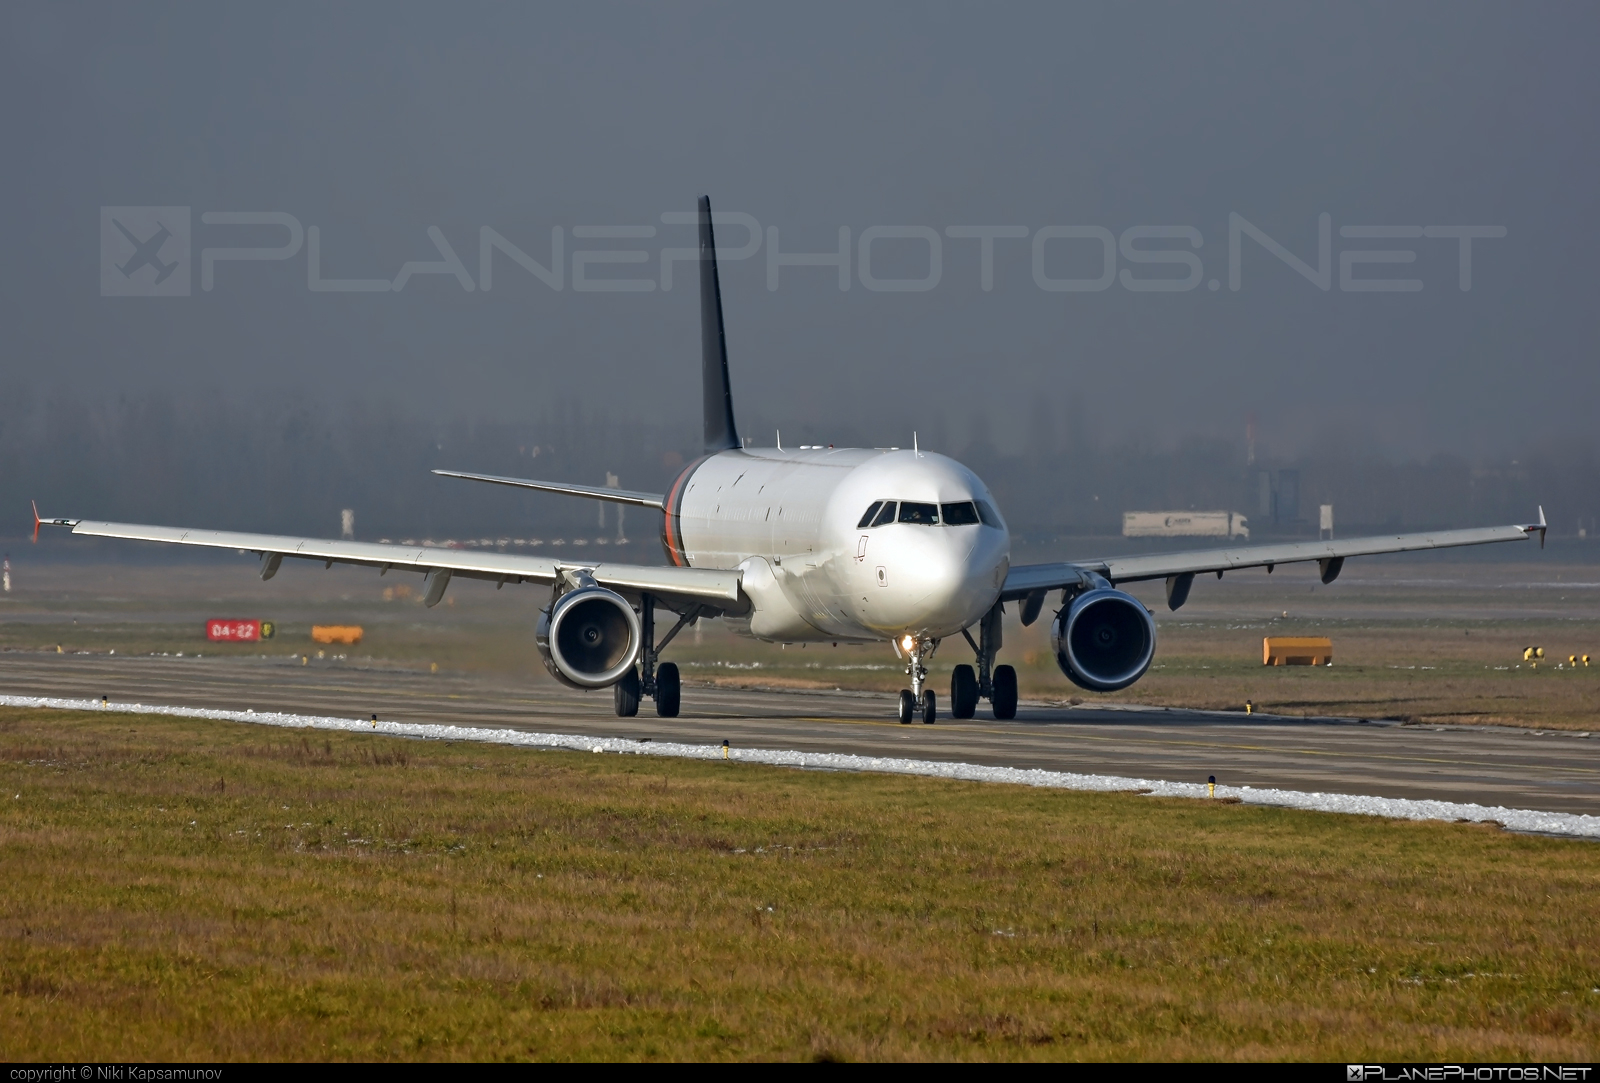 Airbus A321-211P2F - G-POWY operated by Titan Airways #a321freighter #a321p2f #airbus #titanairways